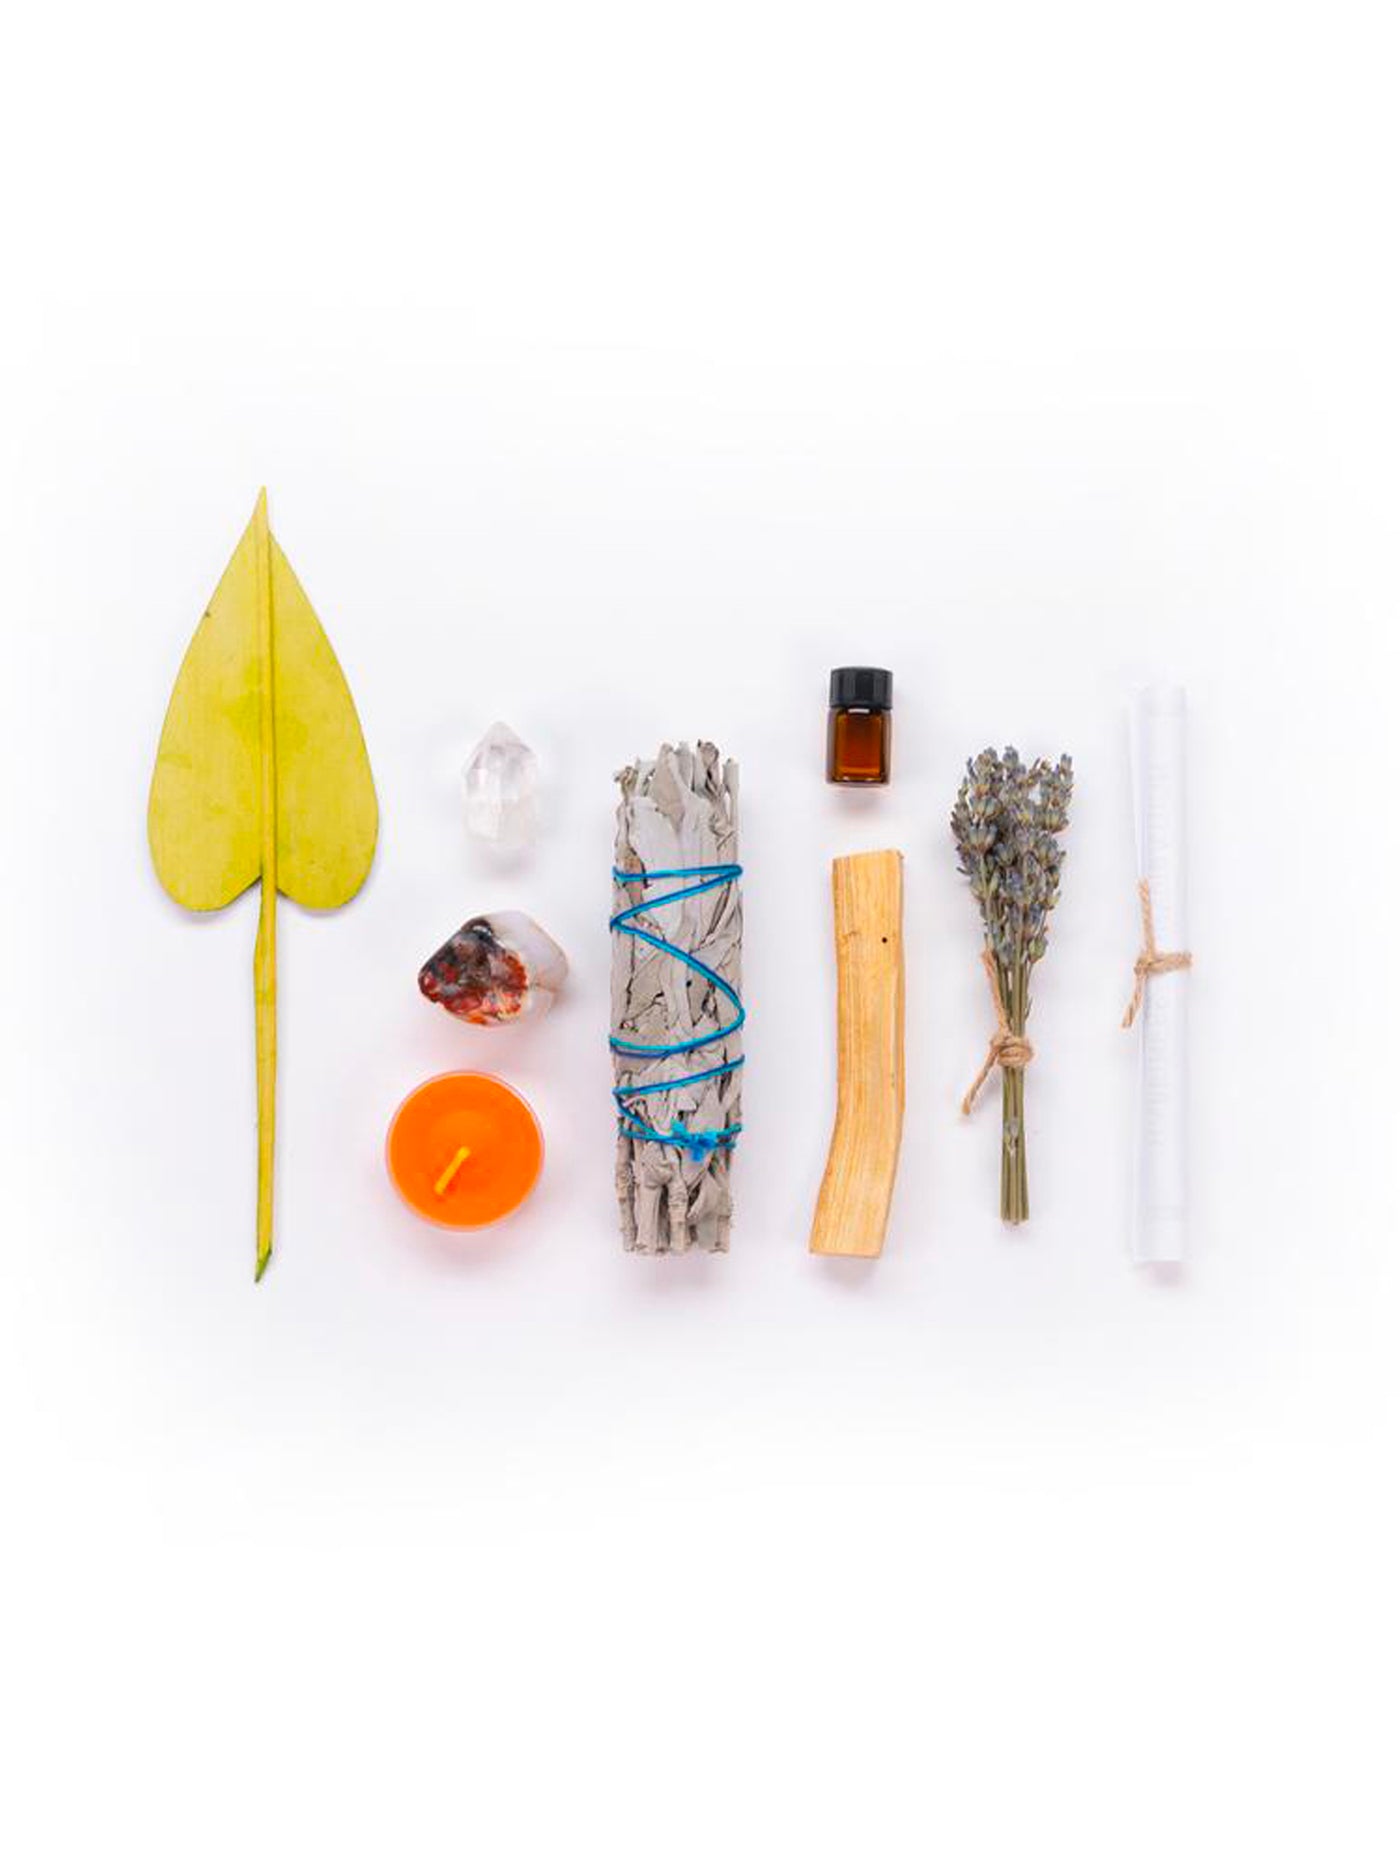 This Ritual Kit includes: Dried lavender mini bouquet, Cedar essential oil, Orange candle, Carnelian, One or two quartz crystals (depending on size/ weight), California white sage stick, Holy palo santo wood from South America and a palm leaf.